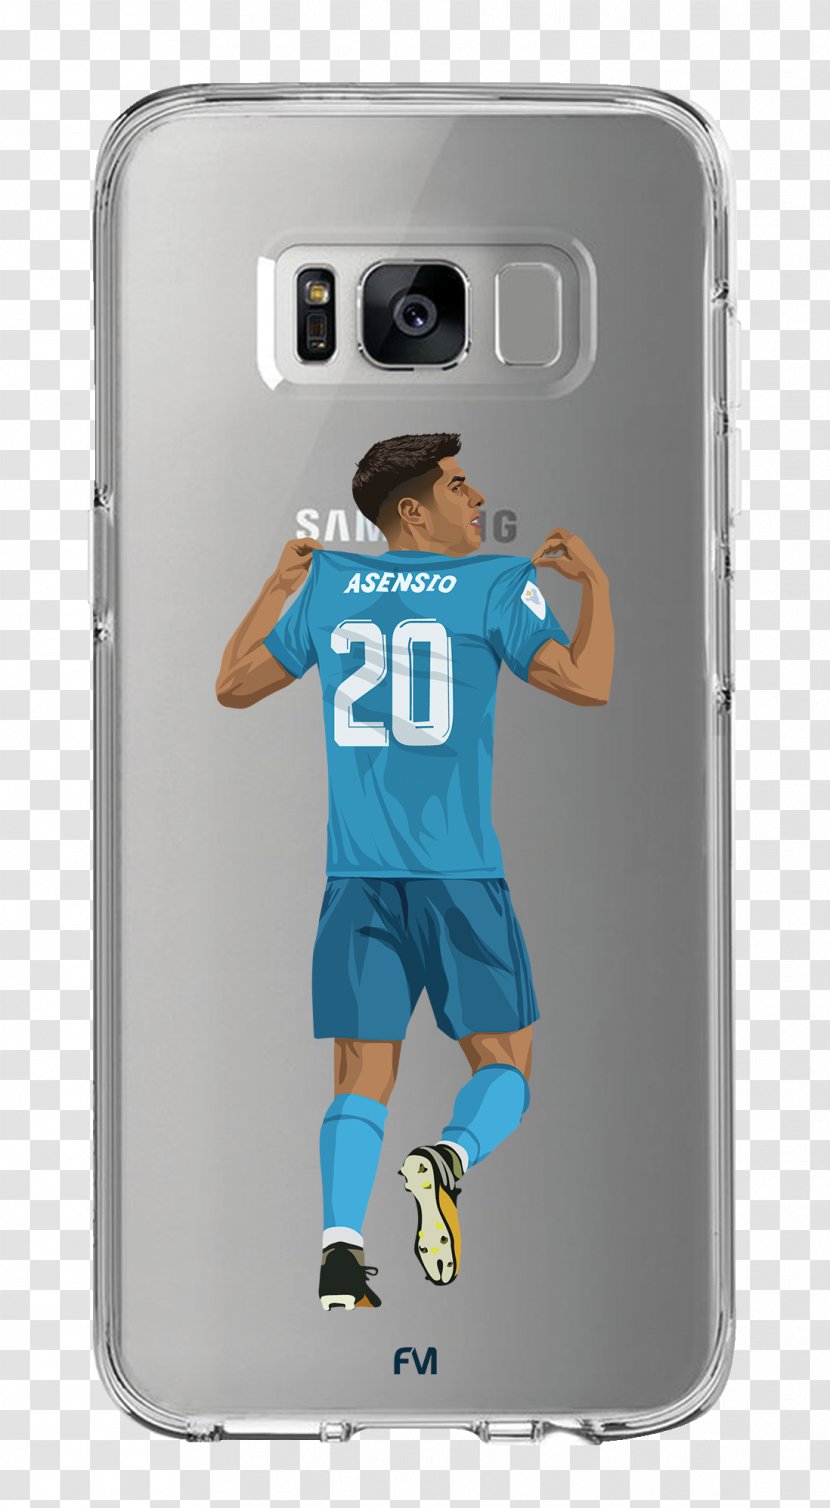 Samsung Galaxy S8 Mobile Phone Accessories Telephone S7 Dab - Sports Equipment - Asensio Transparent PNG